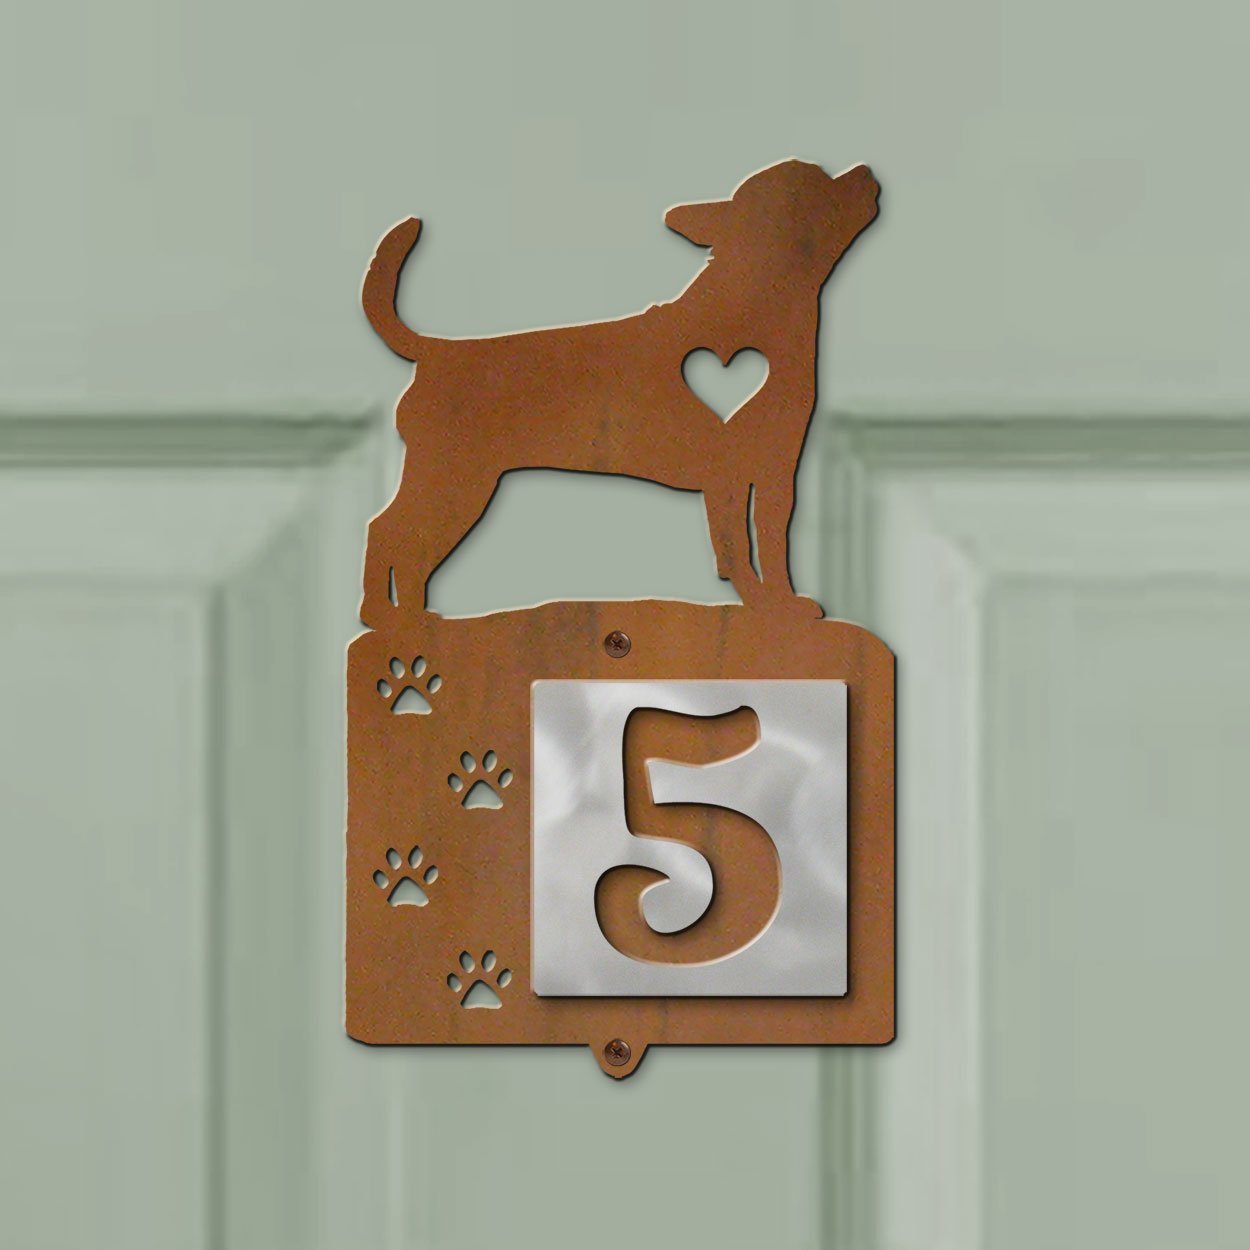 606171 - Chihuahua Nose Prints One-Digit Rustic Tile Door Number